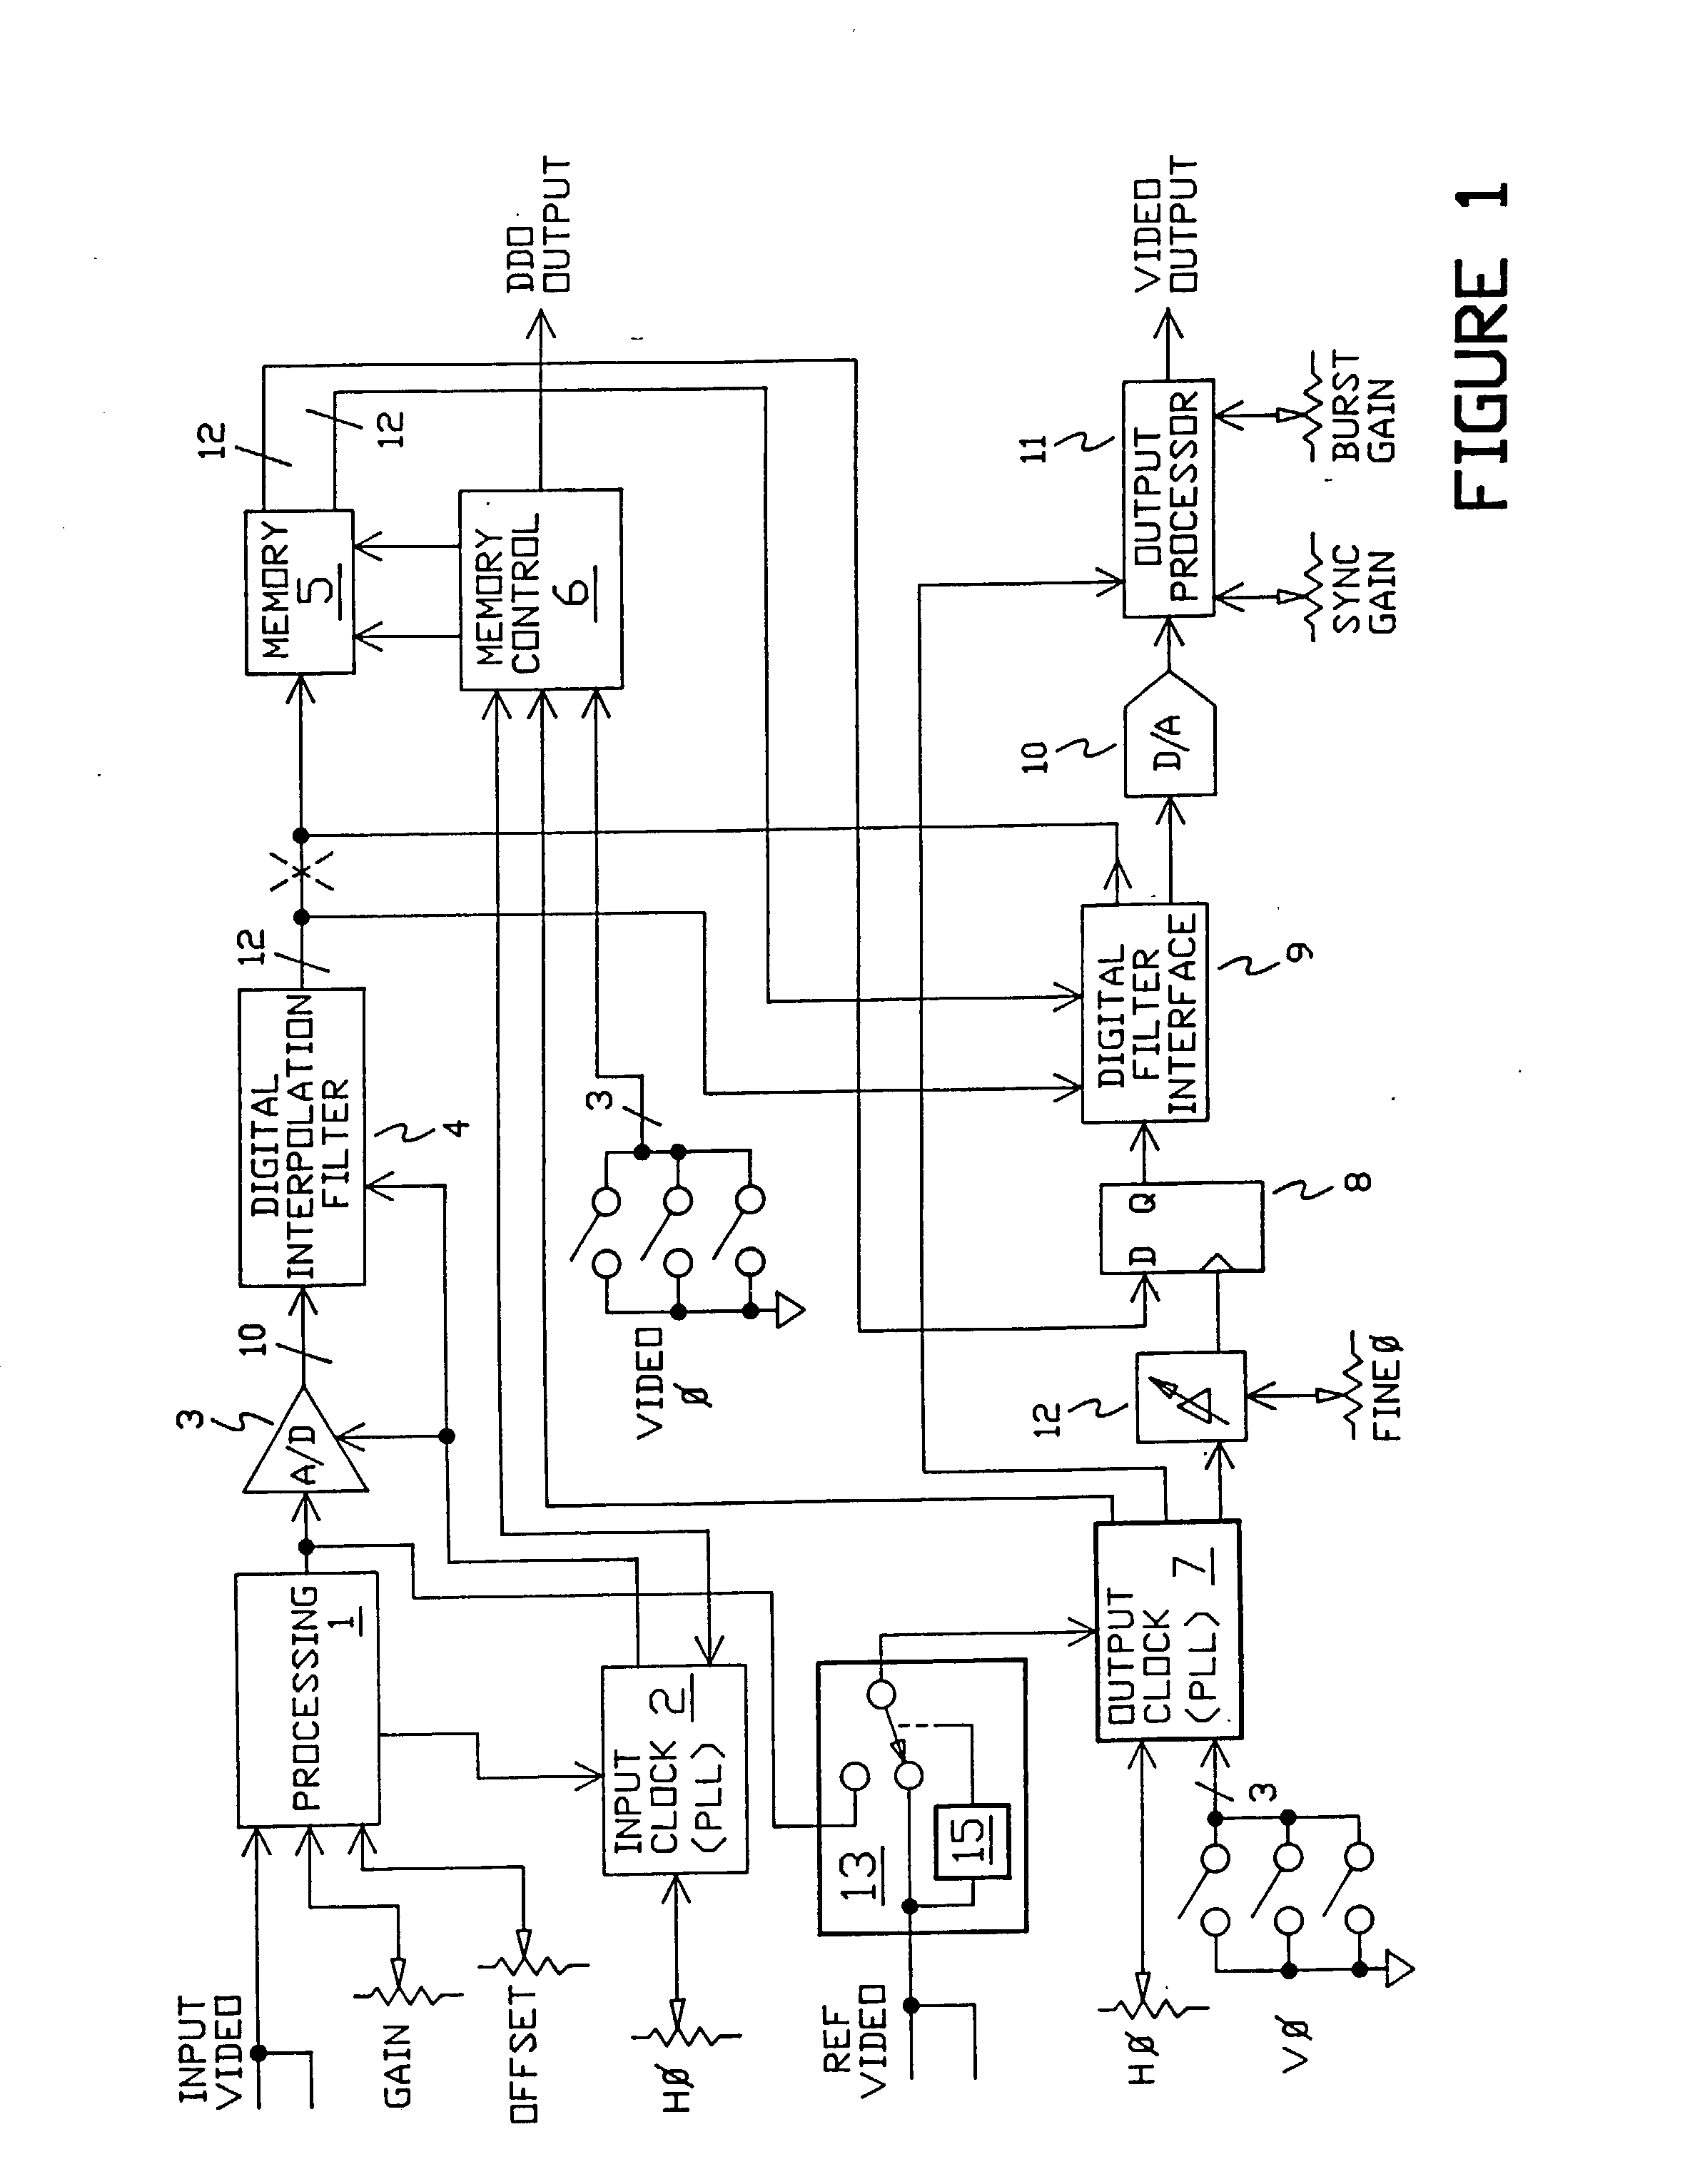 Apparatus and method for digital processing of analog television signals